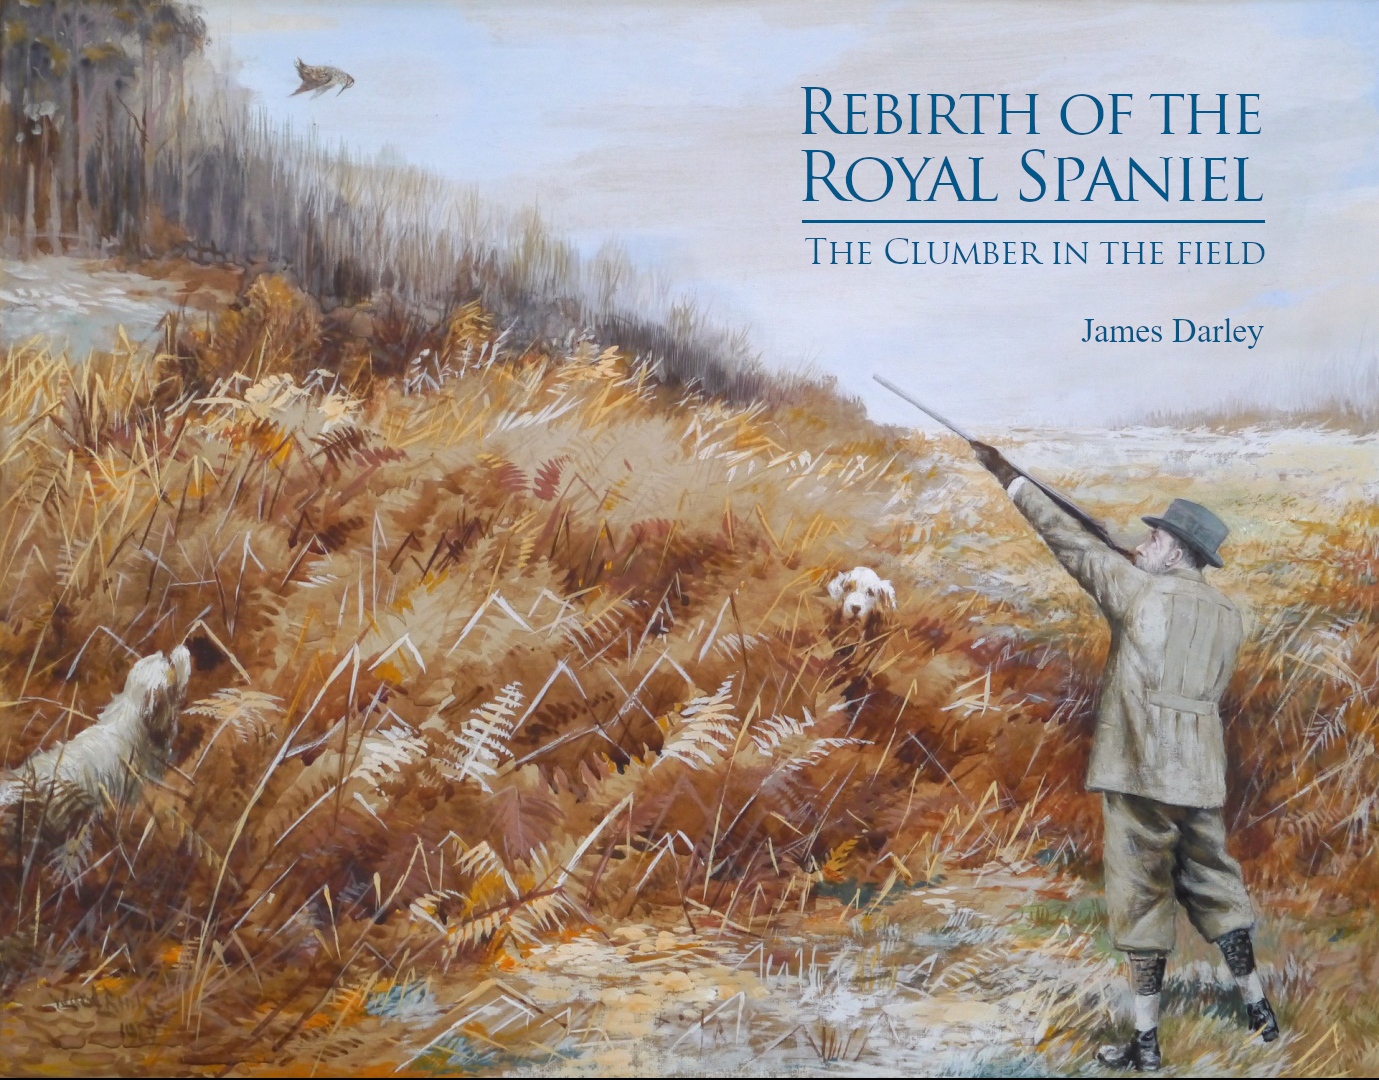 Cover picture of James Darley's book, Rebirth of the Royal Spaniel